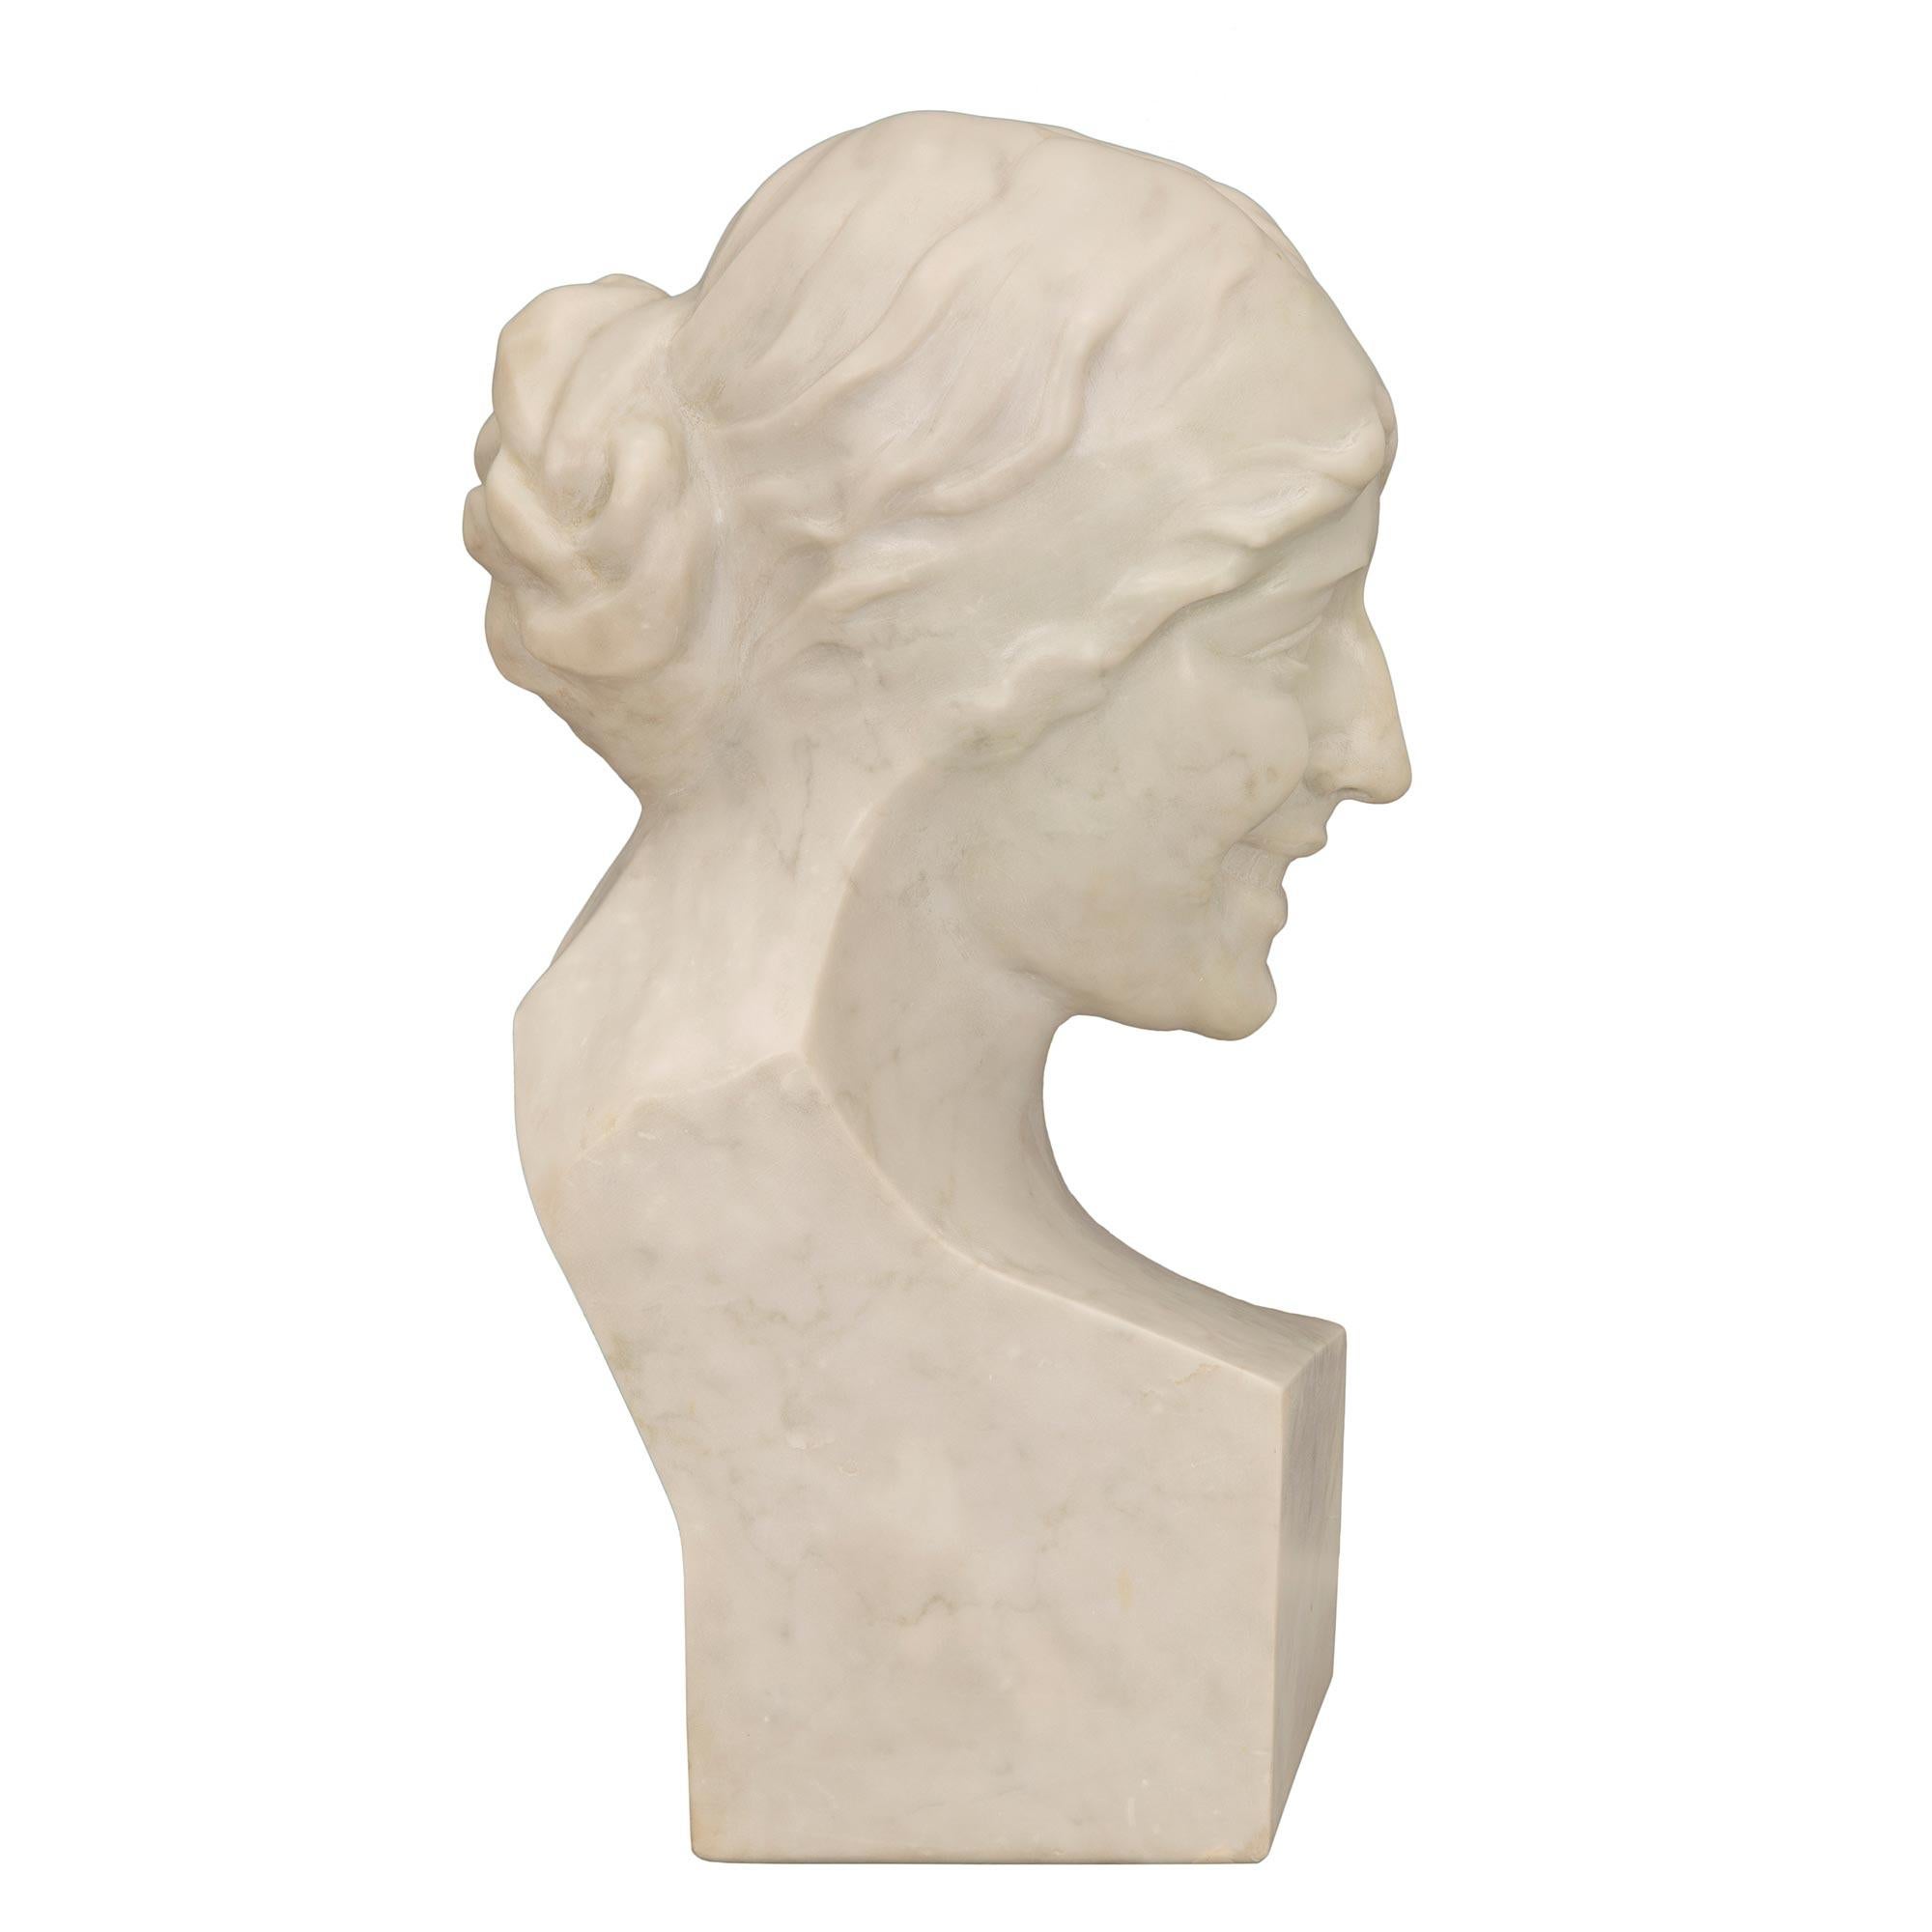 A lovely 19th century white Carrara marble bust of a young maiden signed, L. Correa Morales 1875. The bust is raised by a square base where the signature is displayed at the back. The beautiful and richly sculpted young woman wears her hair tied